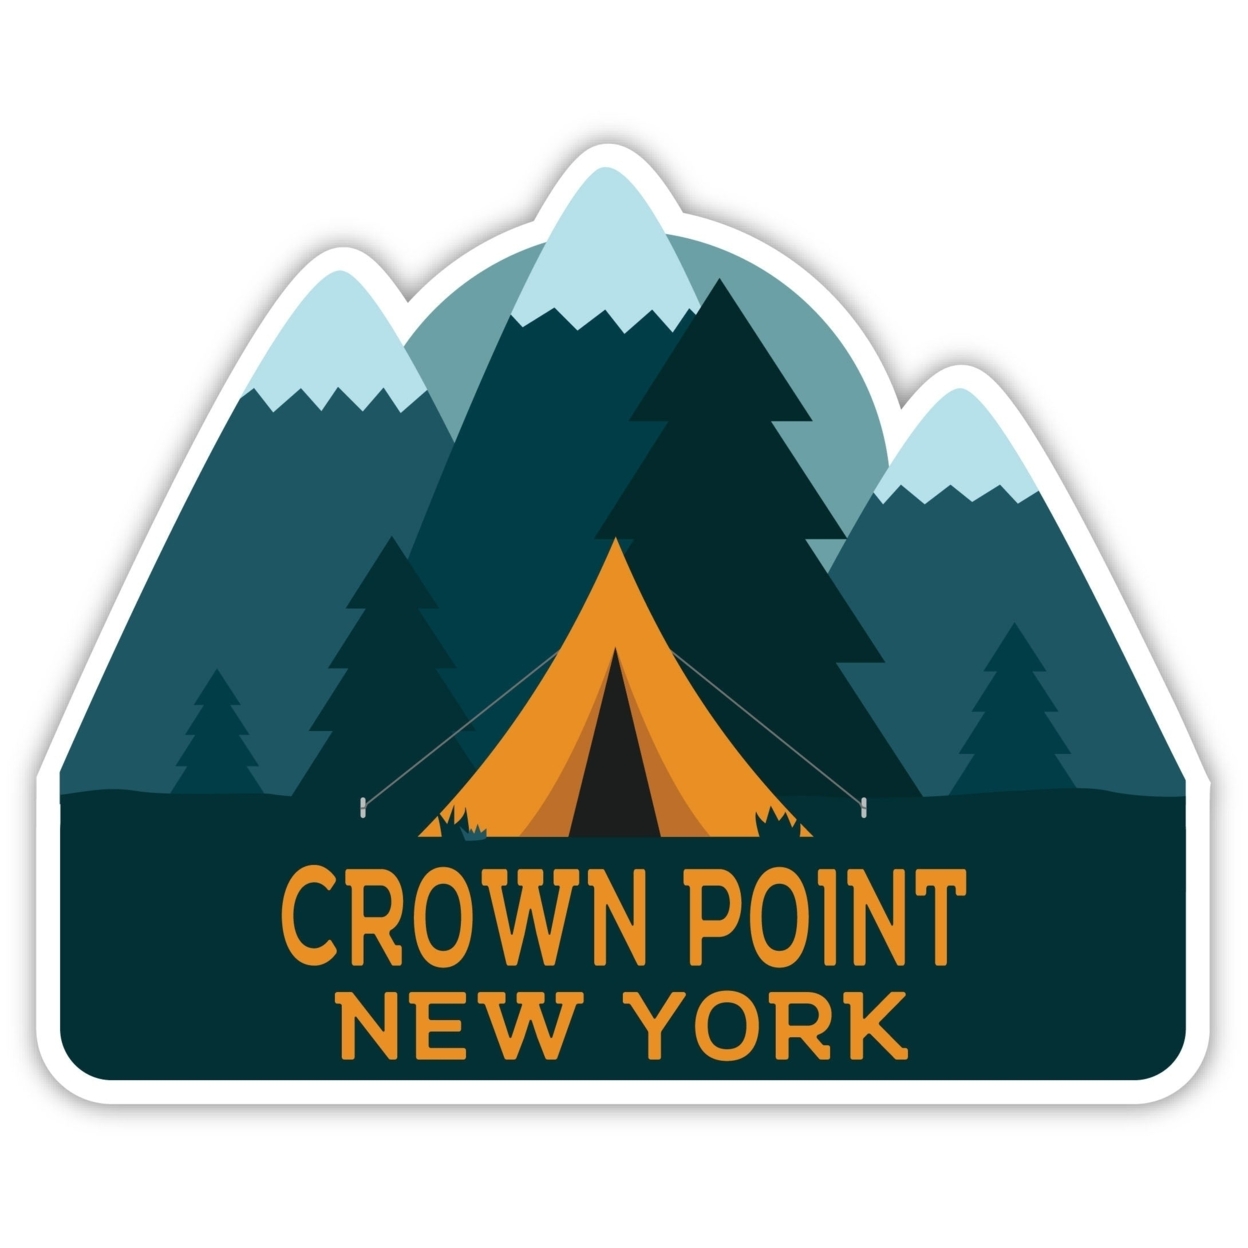 Crown Point New York Souvenir Decorative Stickers (Choose Theme And Size) - 4-Pack, 8-Inch, Tent